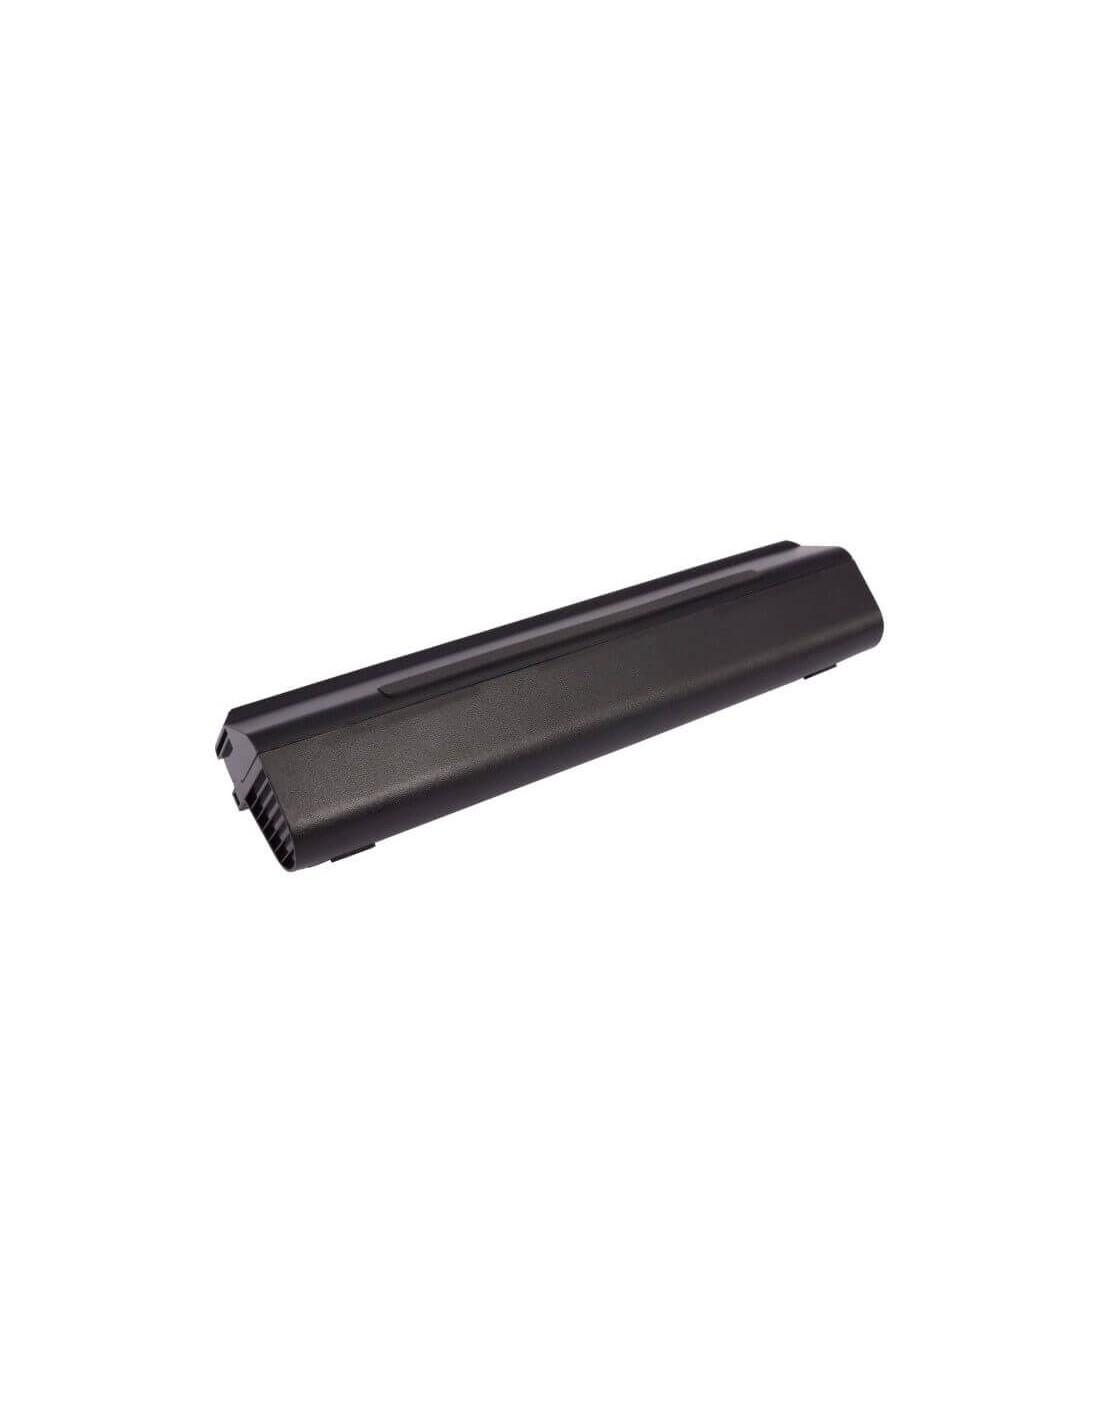 Black Battery for Acer Aspire One, Aspire One A110-1295, Aspire One A110-1545 11.1V, 7800mAh - 86.58Wh